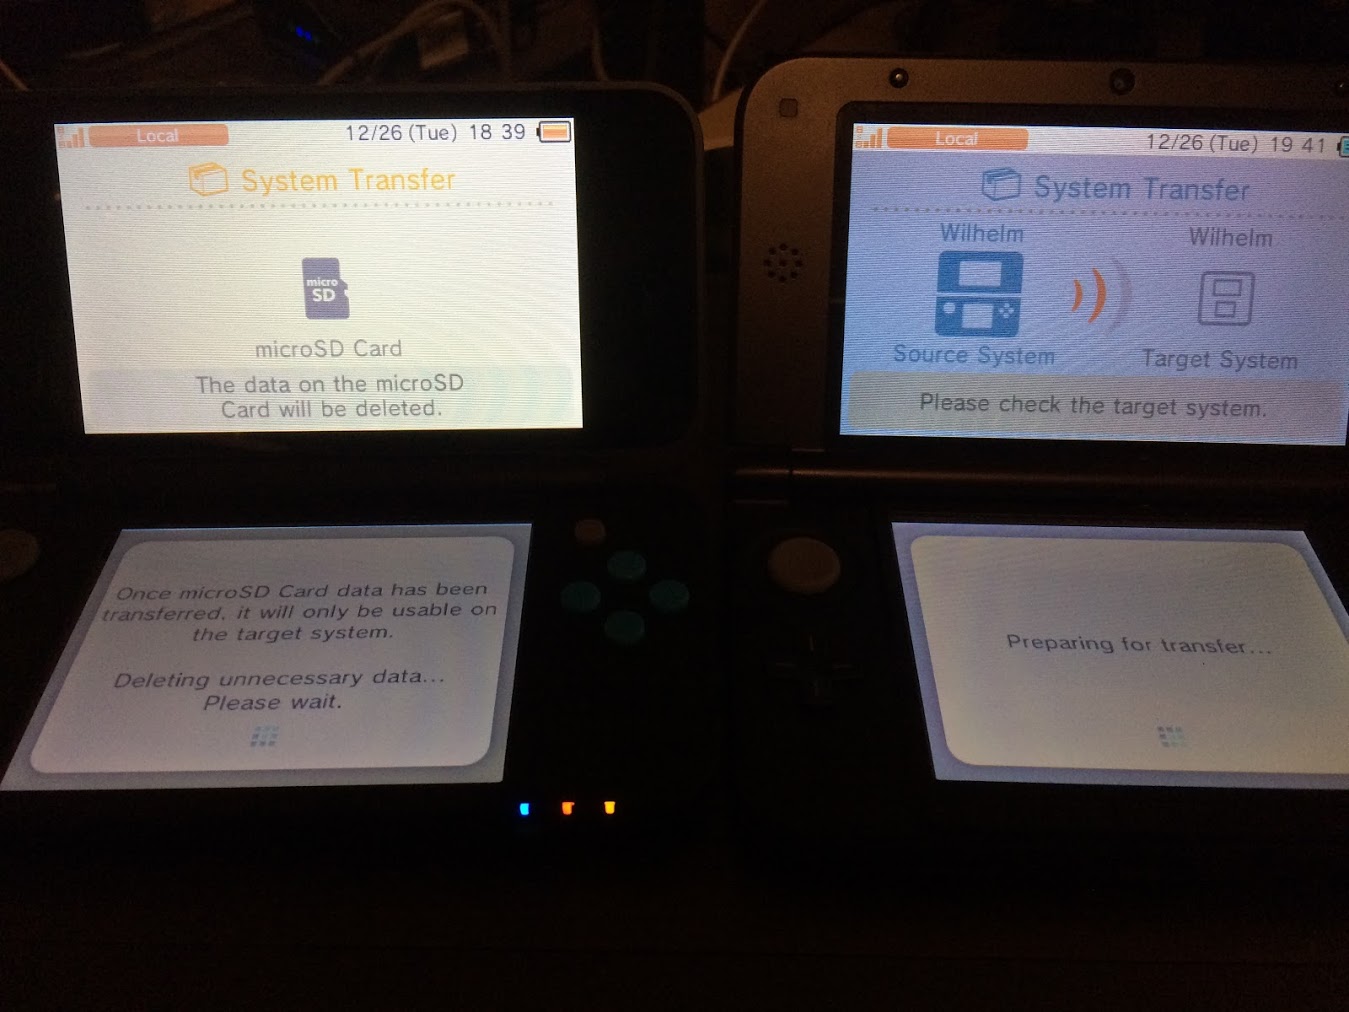 2ds xl system